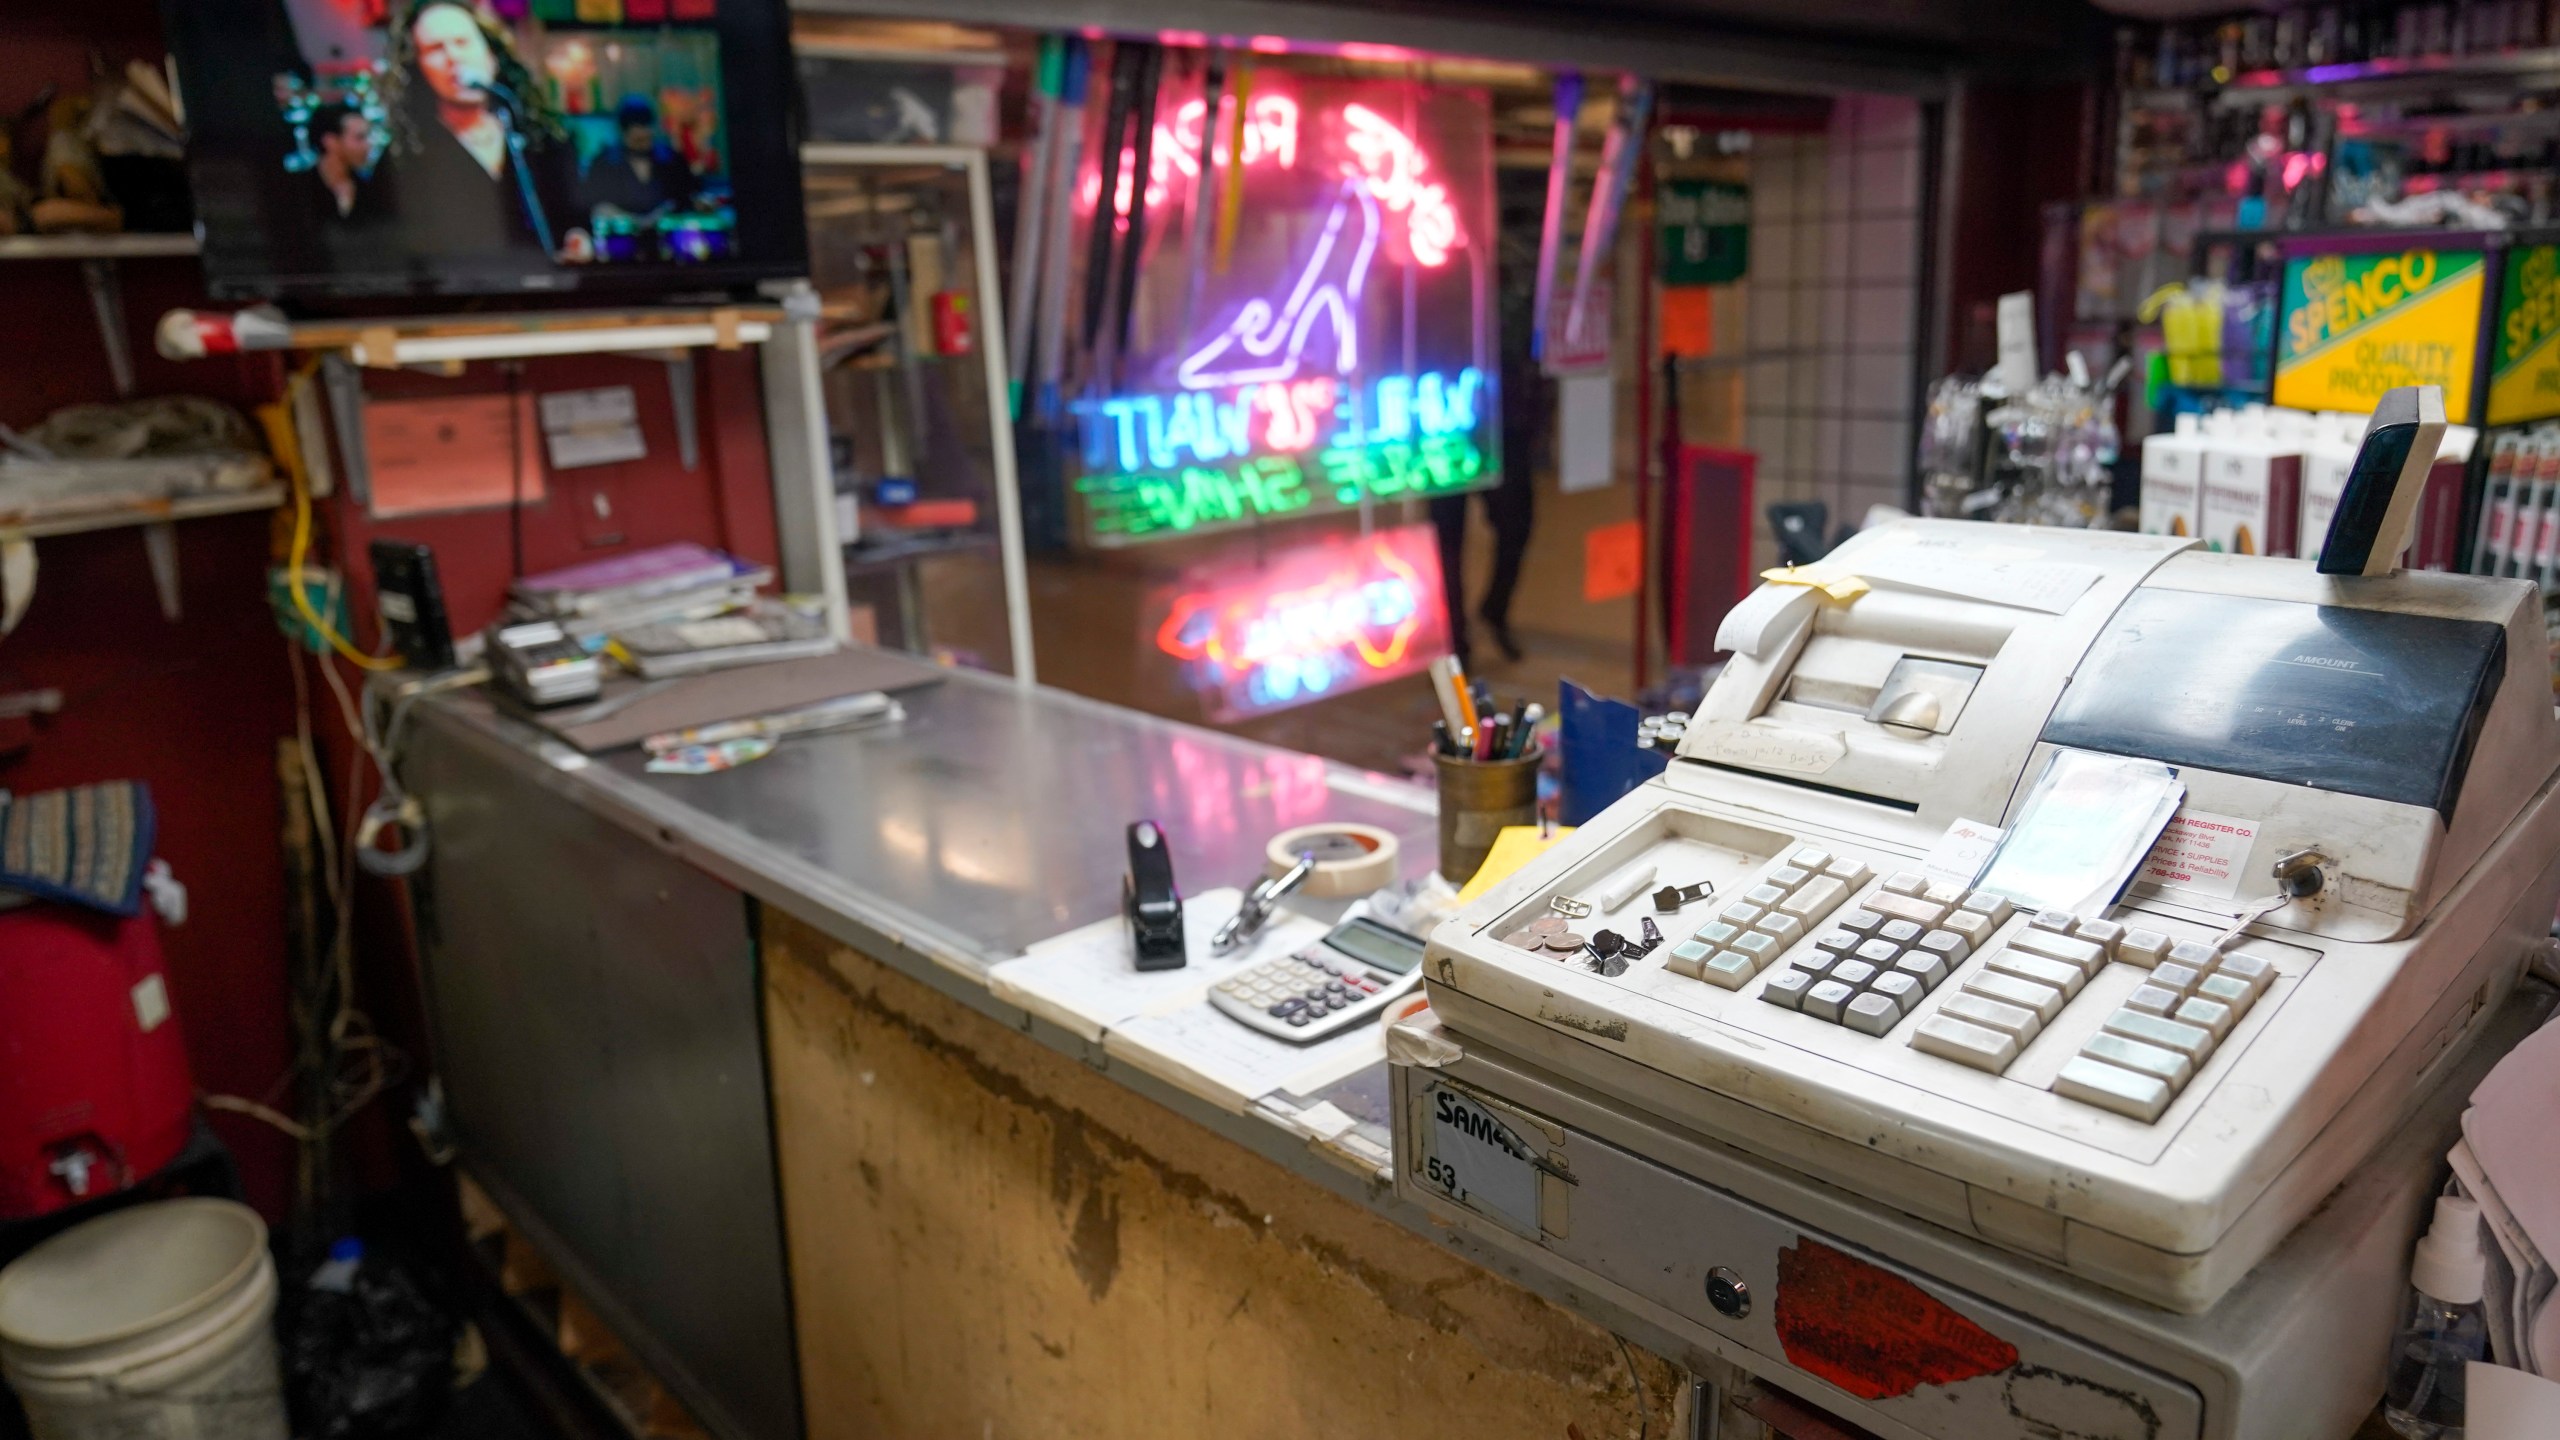 FILE - A cash register is seen on the front counter at the Alpha Shoe Repair Corp., Feb. 3, 2023, in New York. As Tax Day, April 15, approaches, there are plenty of things small business owners should keep in mind when filing taxes this year. (AP Photo/Mary Altaffer, File)